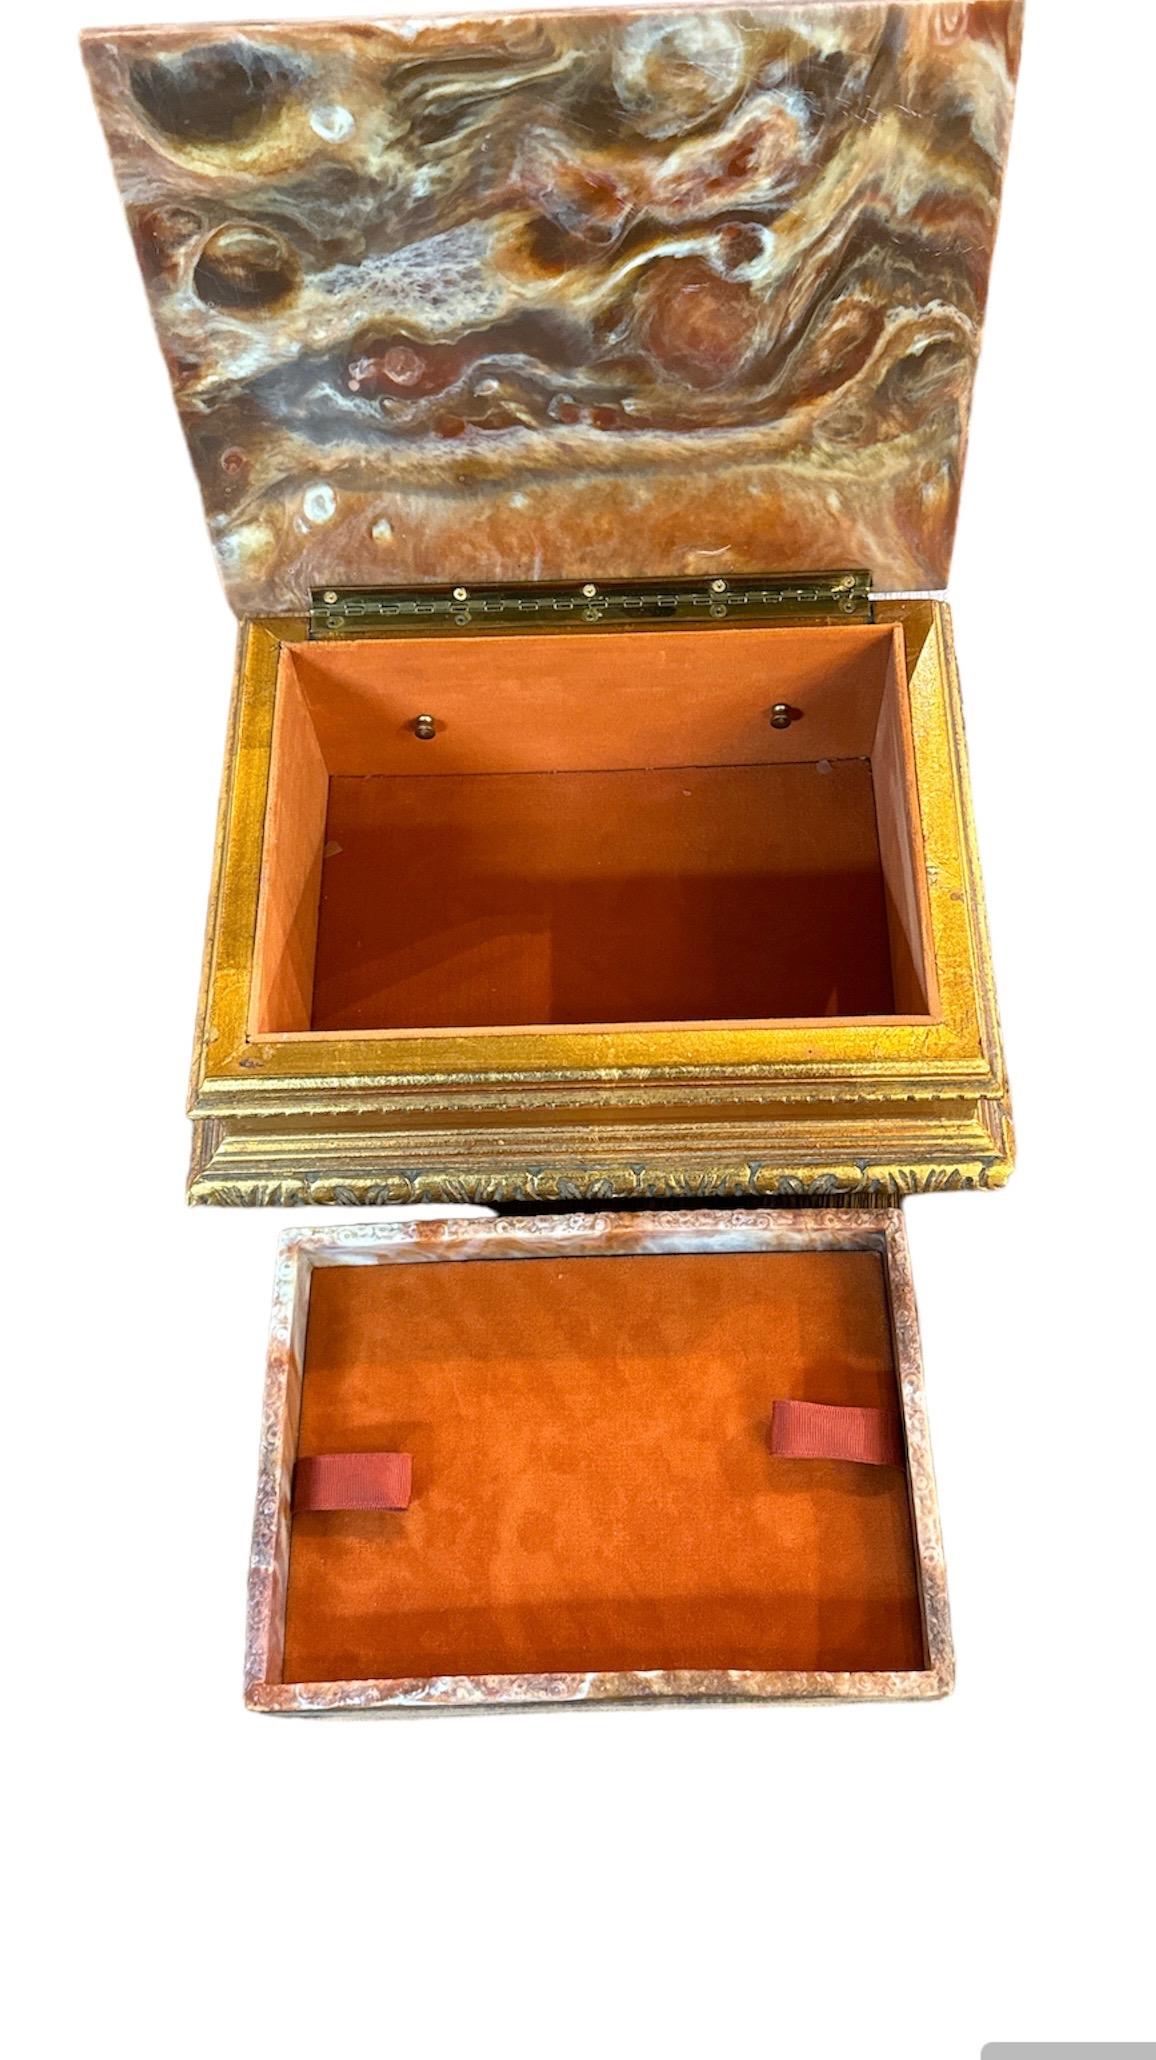 Vintage Incolay Stone Italian Jewelry Box - Womderful design wooden box with a great blend of color and style. The front display shows four people standing on what seems to be a log or boat. All facing towards the center of the display. 
